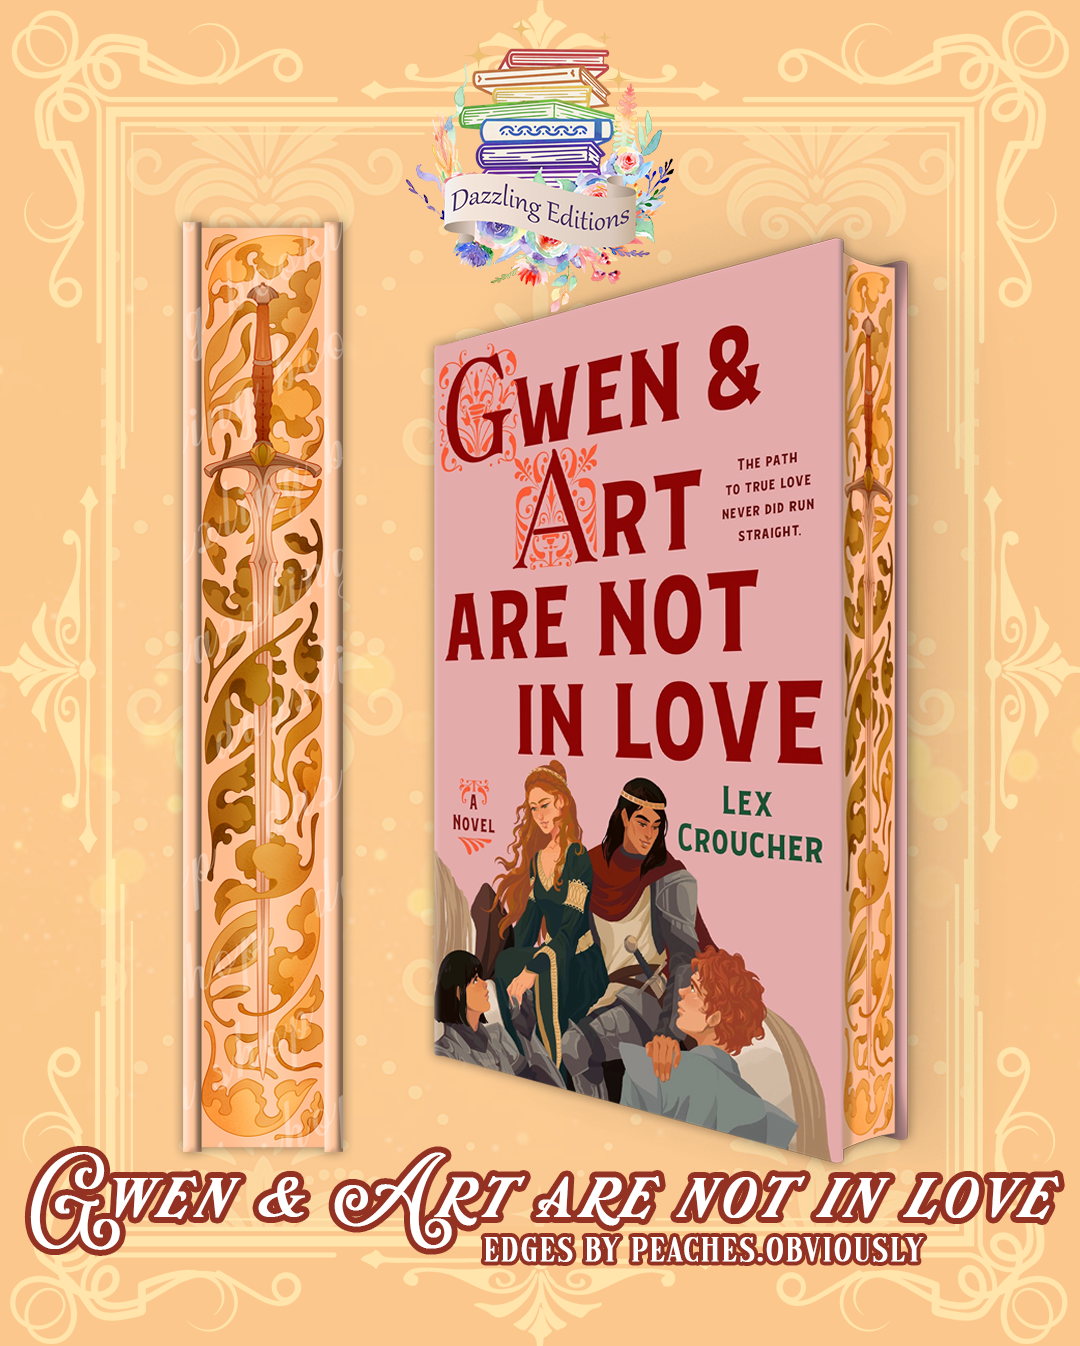 Gwen & Art Are Not in Love: A Novel by Lex Croucher, Hardcover